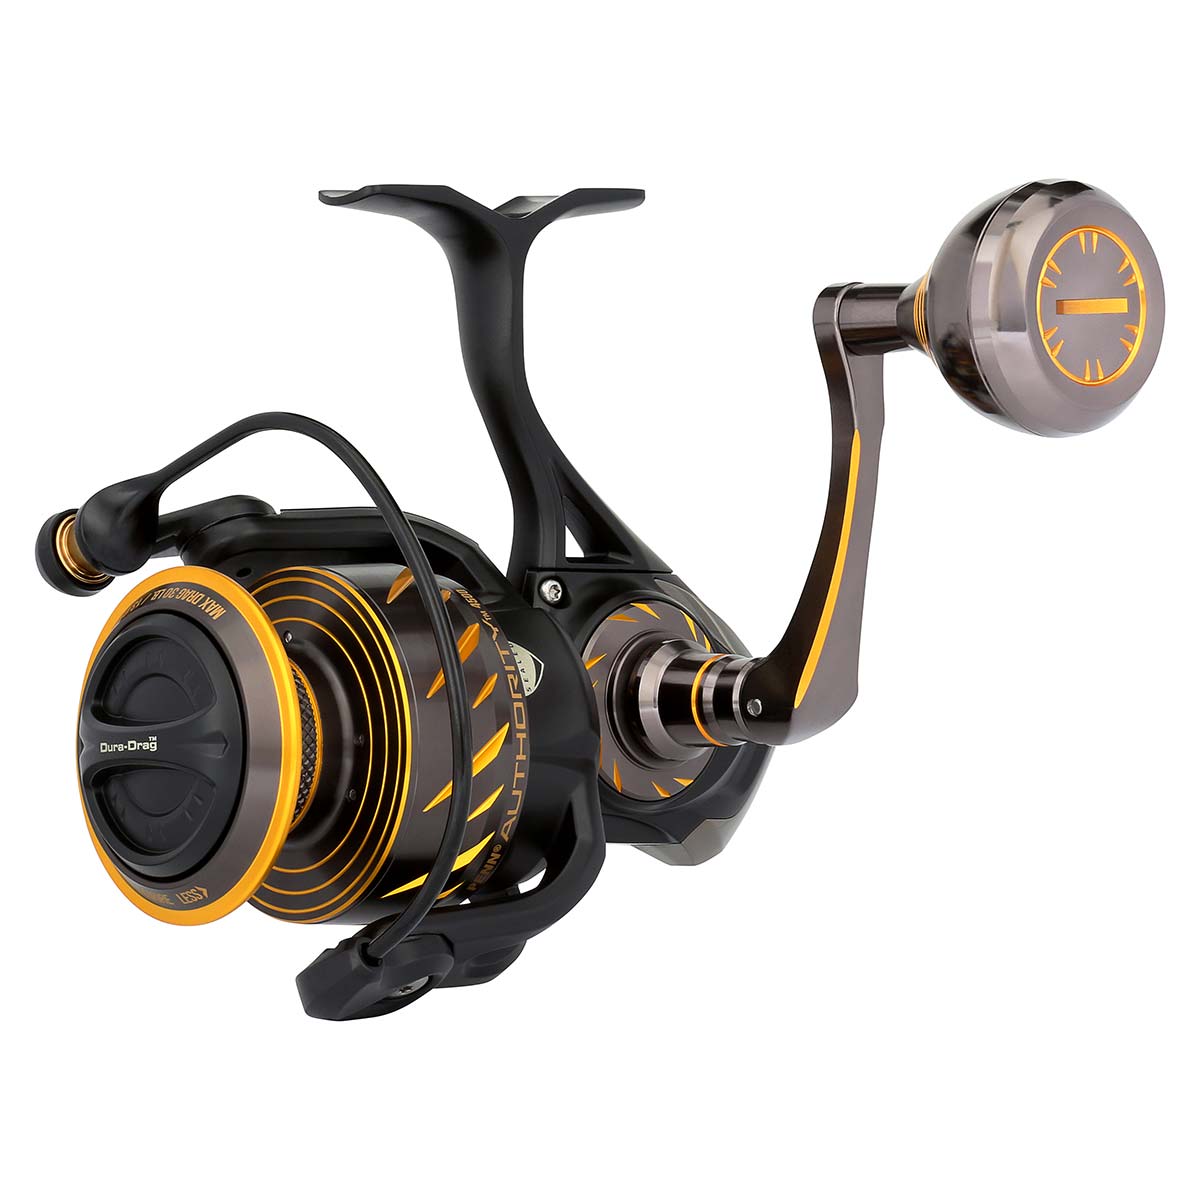 Holiday Gift Guide for Saltwater Fishing